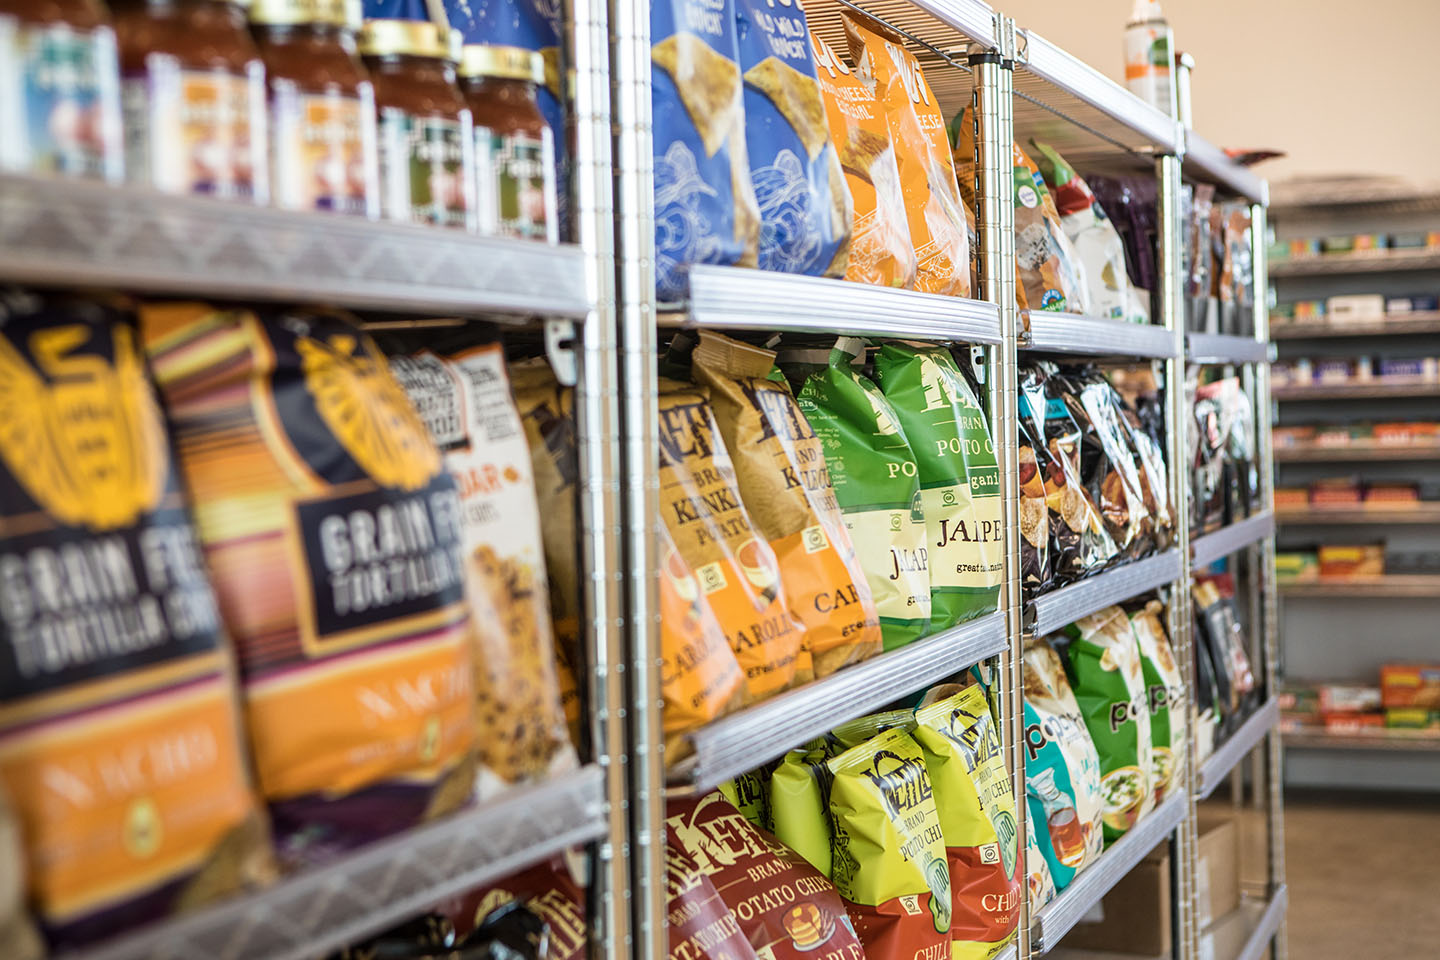 The shelves of Walsh Village Market stocked with grad-and-go items